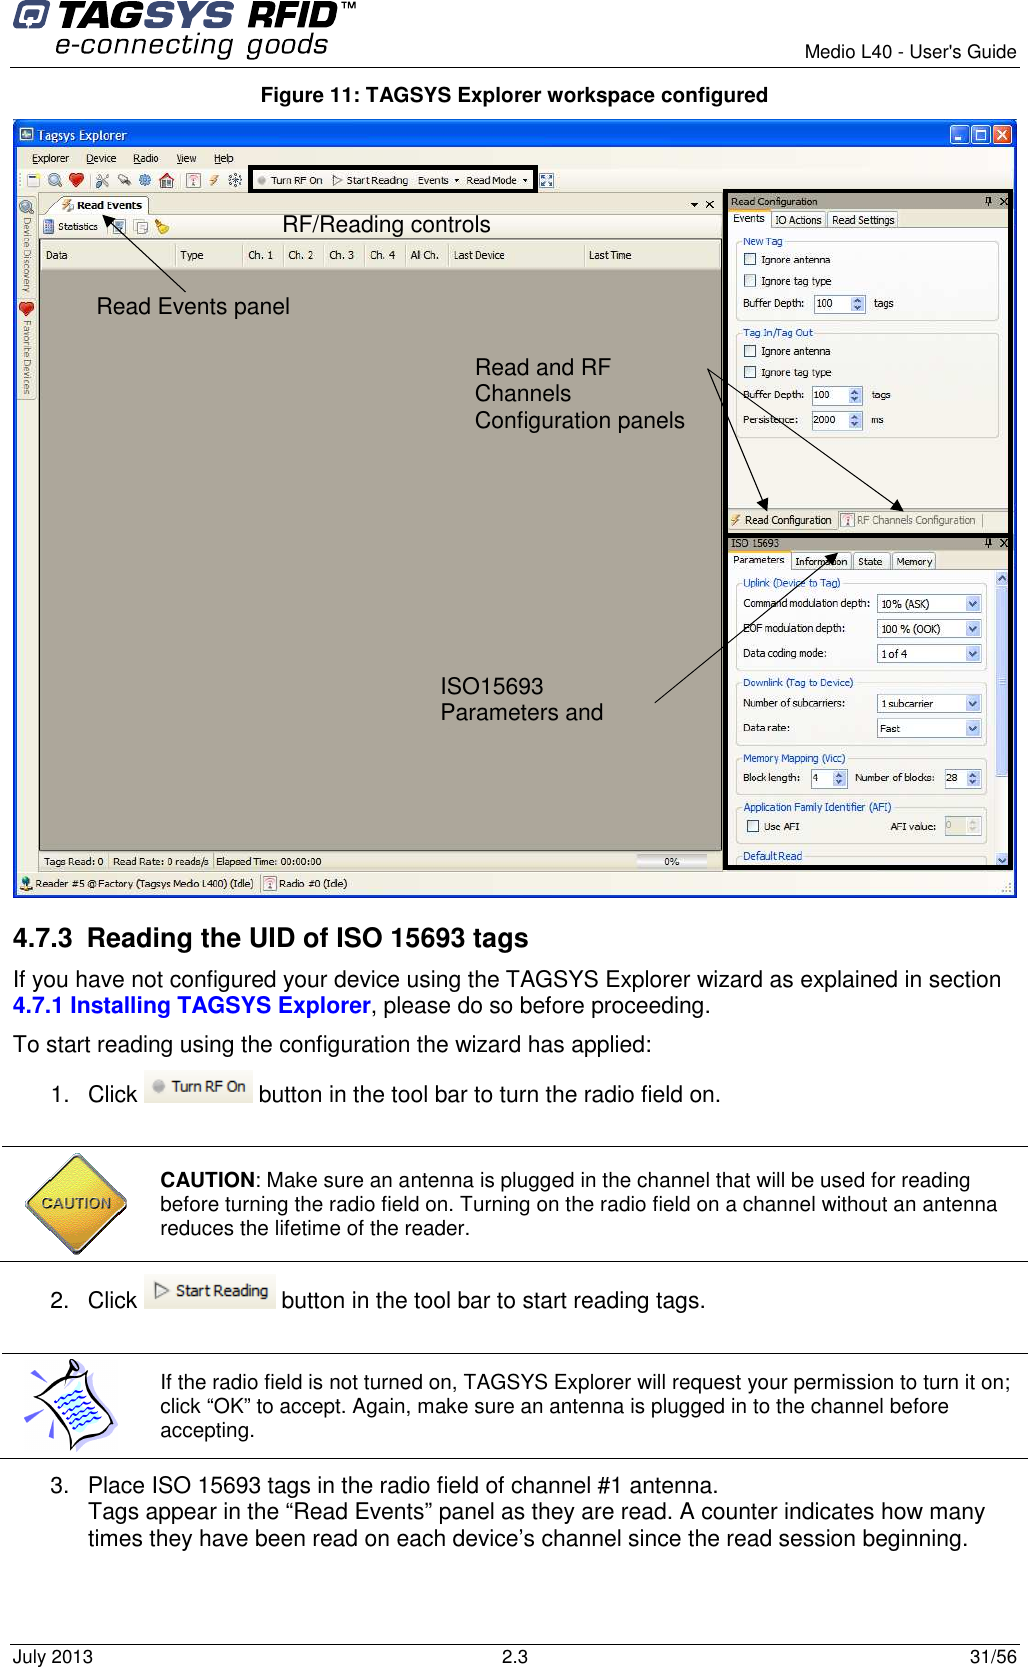        Medio L40 - User&apos;s Guide July 2013  2.3  31/56  Figure 11: TAGSYS Explorer workspace configured  4.7.3  Reading the UID of ISO 15693 tags If you have not configured your device using the TAGSYS Explorer wizard as explained in section 4.7.1 Installing TAGSYS Explorer, please do so before proceeding. To start reading using the configuration the wizard has applied: 1.  Click   button in the tool bar to turn the radio field on.   CAUTION: Make sure an antenna is plugged in the channel that will be used for reading before turning the radio field on. Turning on the radio field on a channel without an antenna reduces the lifetime of the reader. 2.  Click   button in the tool bar to start reading tags.   If the radio field is not turned on, TAGSYS Explorer will request your permission to turn it on; click “OK” to accept. Again, make sure an antenna is plugged in to the channel before accepting. 3.  Place ISO 15693 tags in the radio field of channel #1 antenna. Tags appear in the “Read Events” panel as they are read. A counter indicates how many times they have been read on each device’s channel since the read session beginning.  RF/Reading controls  Read Events panel  Read and RF Channels Configuration panels    ISO15693 Parameters and Commands panel 